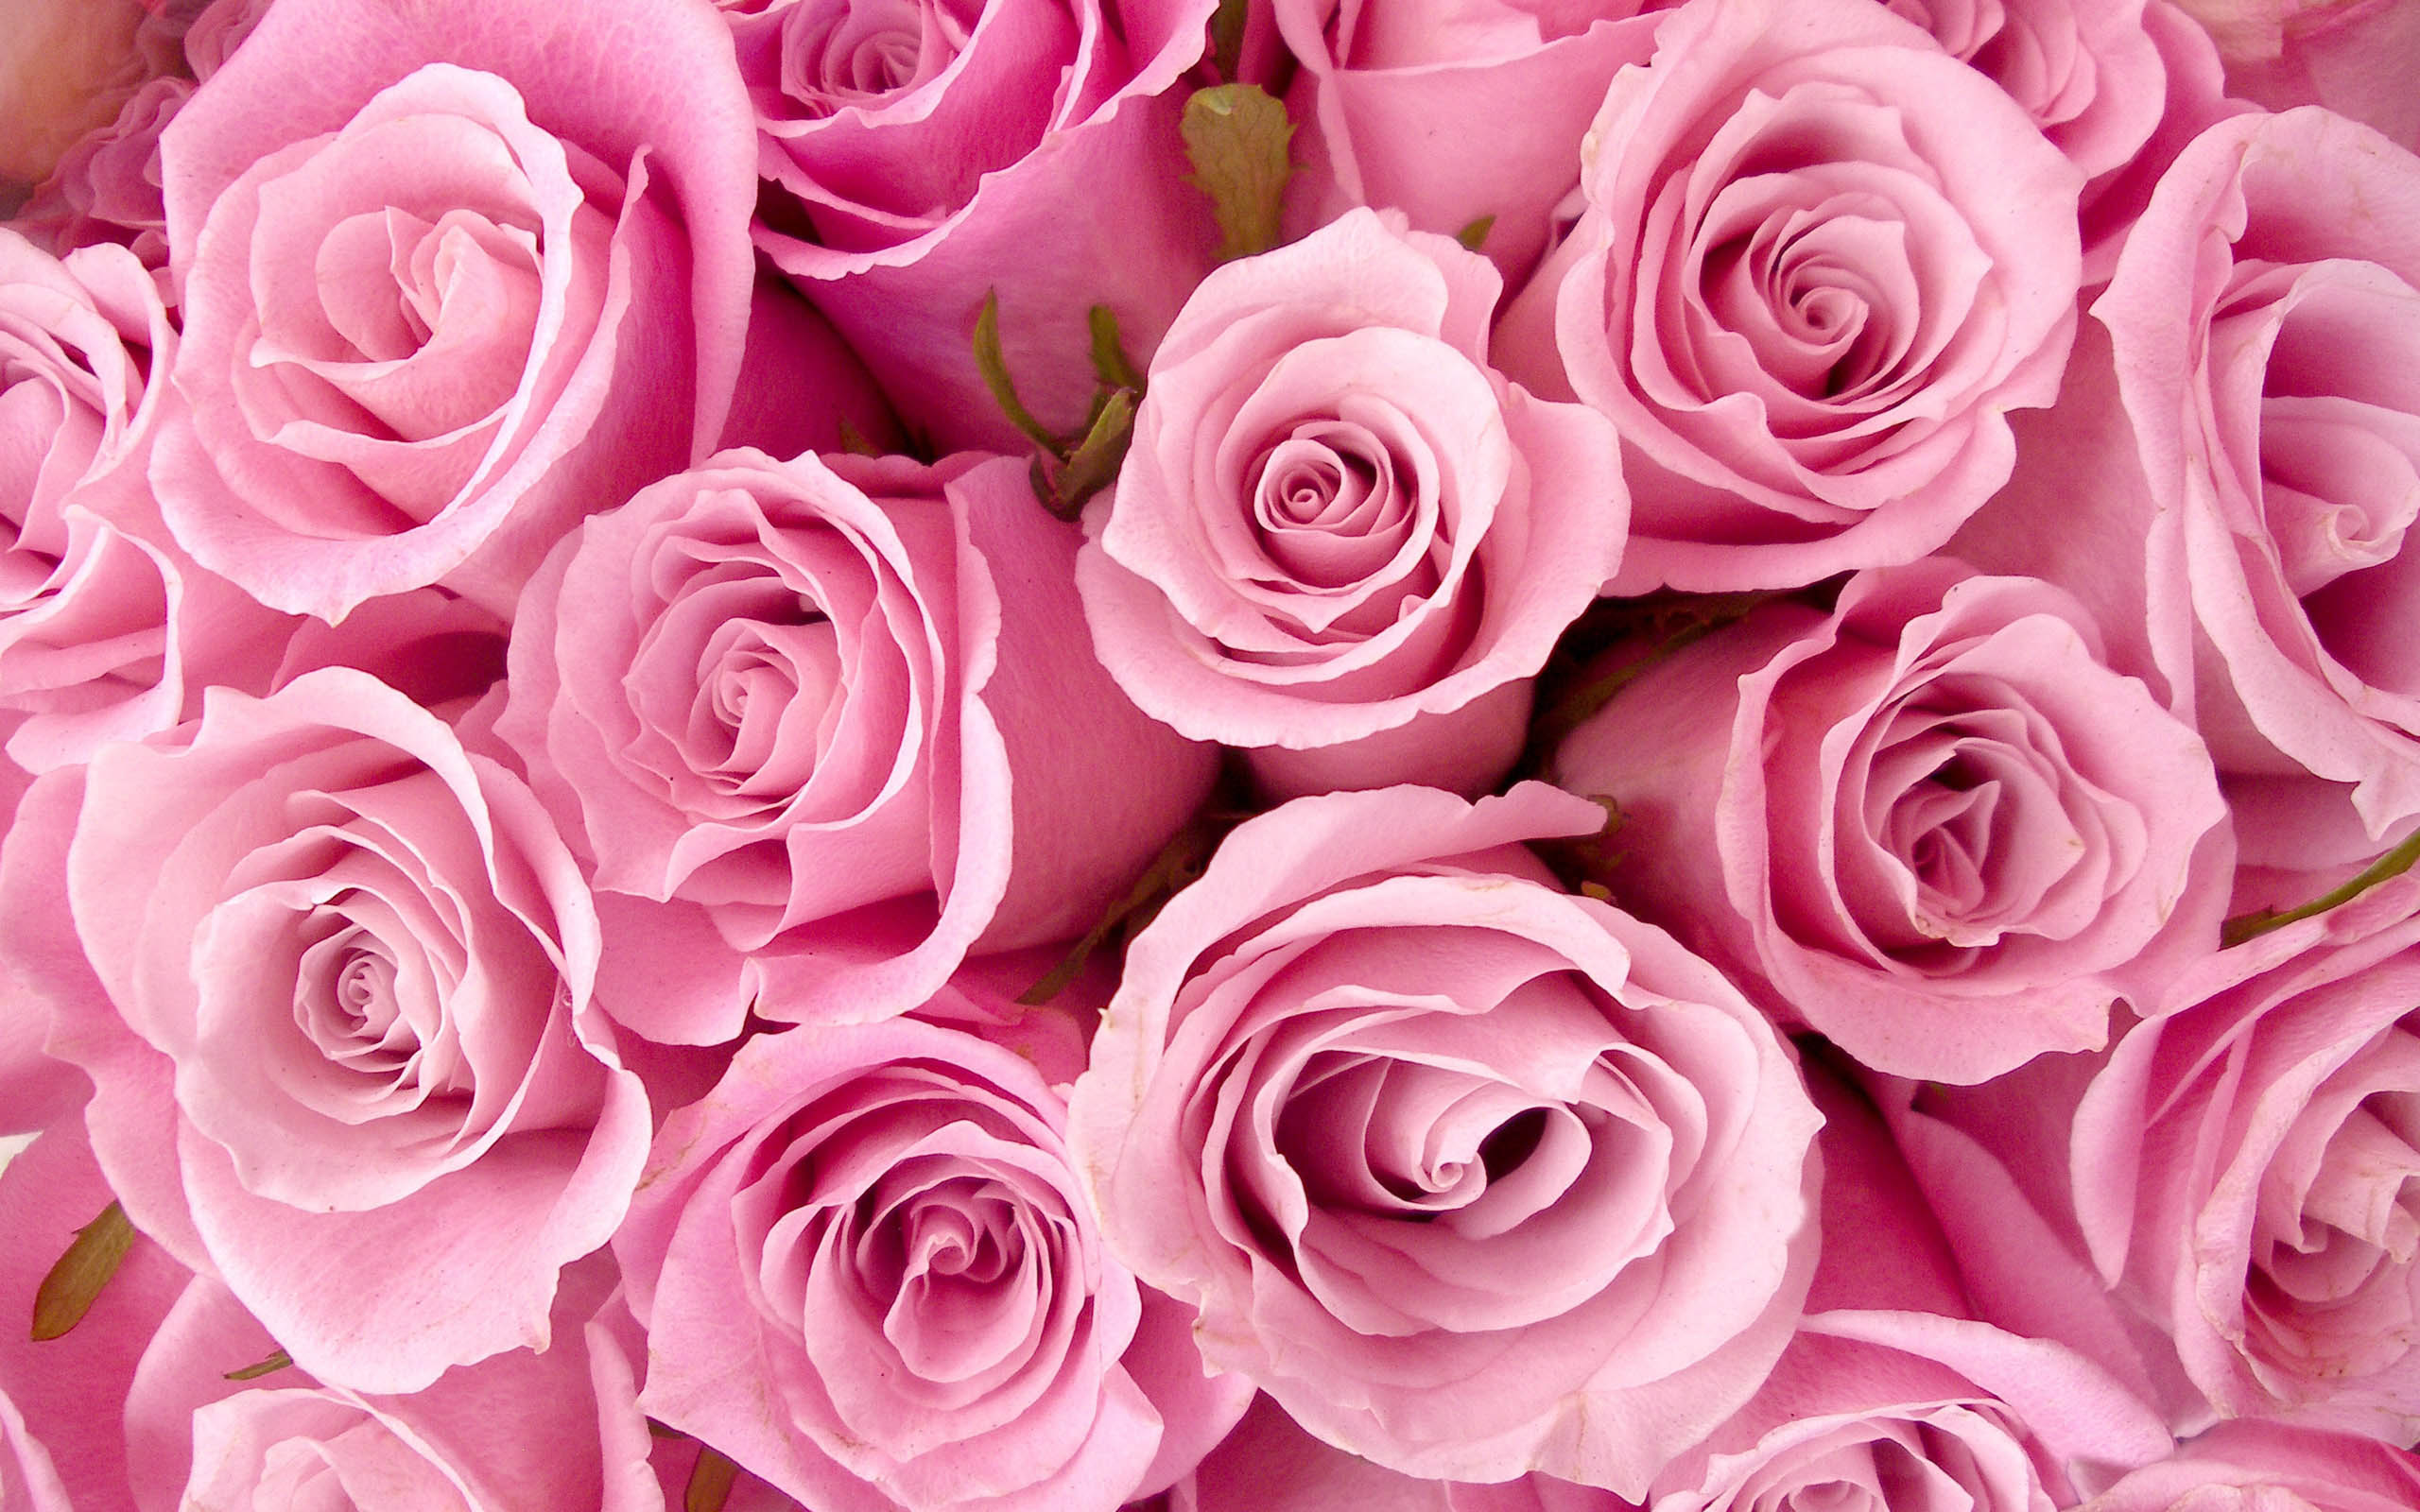 Free download Gorgeous Roses The Meaning of Rose Colors [35 PICS] [2560x1600] for your Desktop, Mobile & Tablet. Explore Rose Wallpaper Image. Rose Wallpaper, Wallpaper Rose, Rose Flower Wallpaper Image